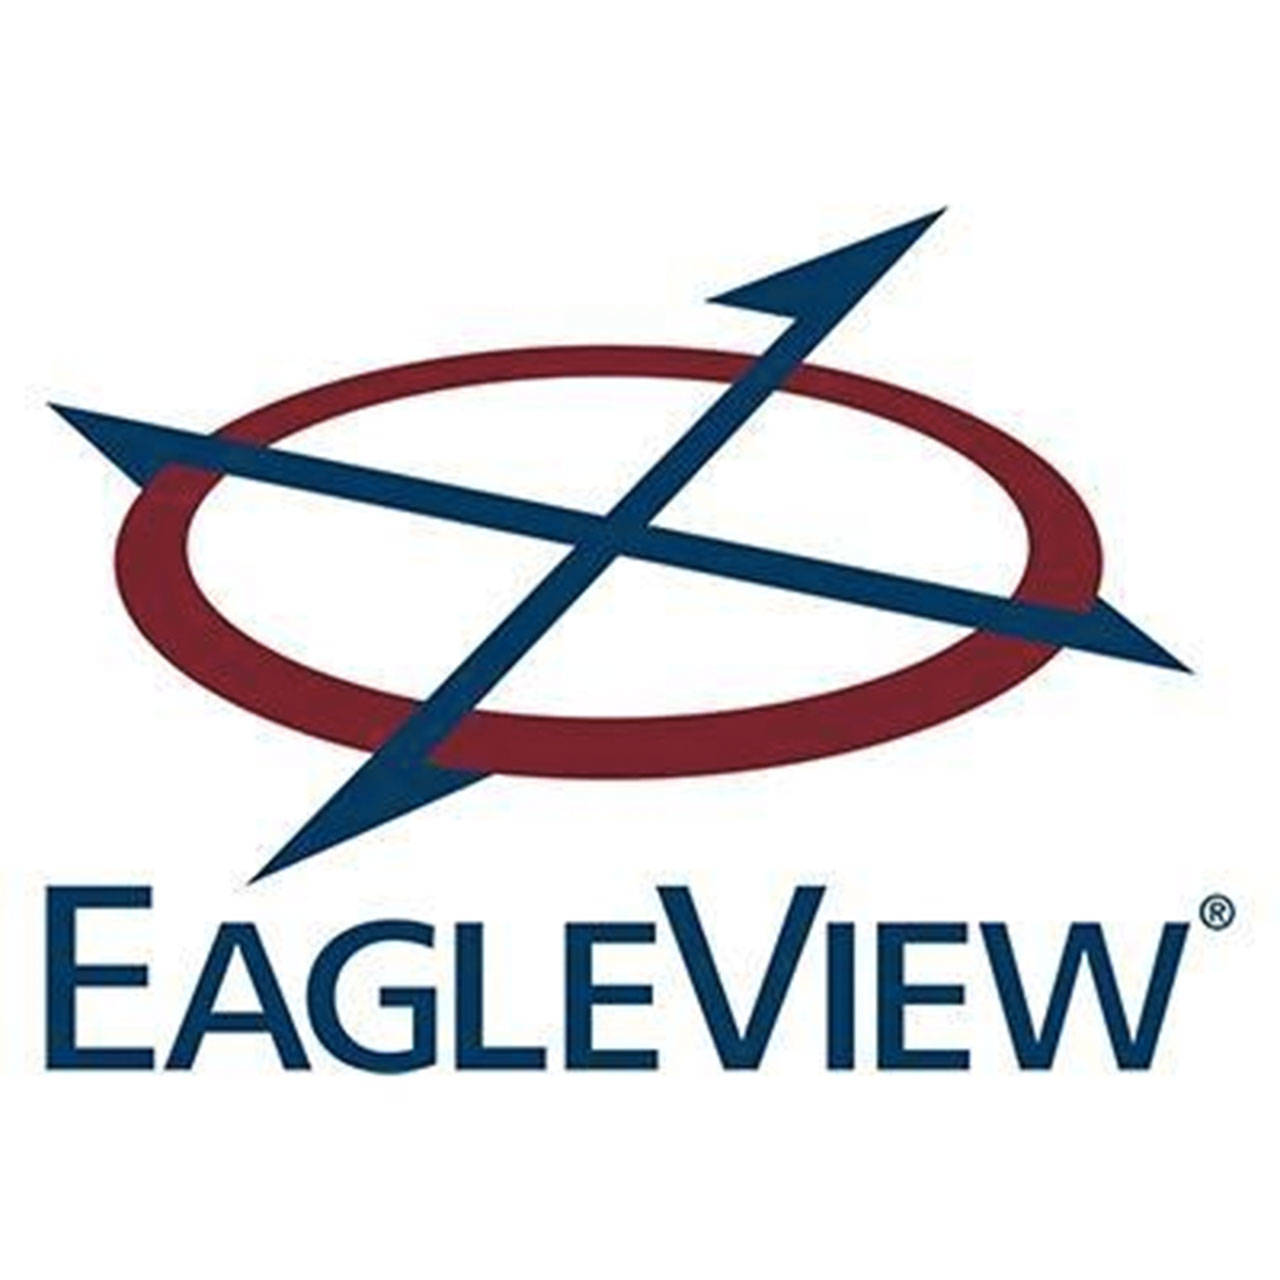 Bothell’s EagleView Technologies helps with Hurricane Irma efforts